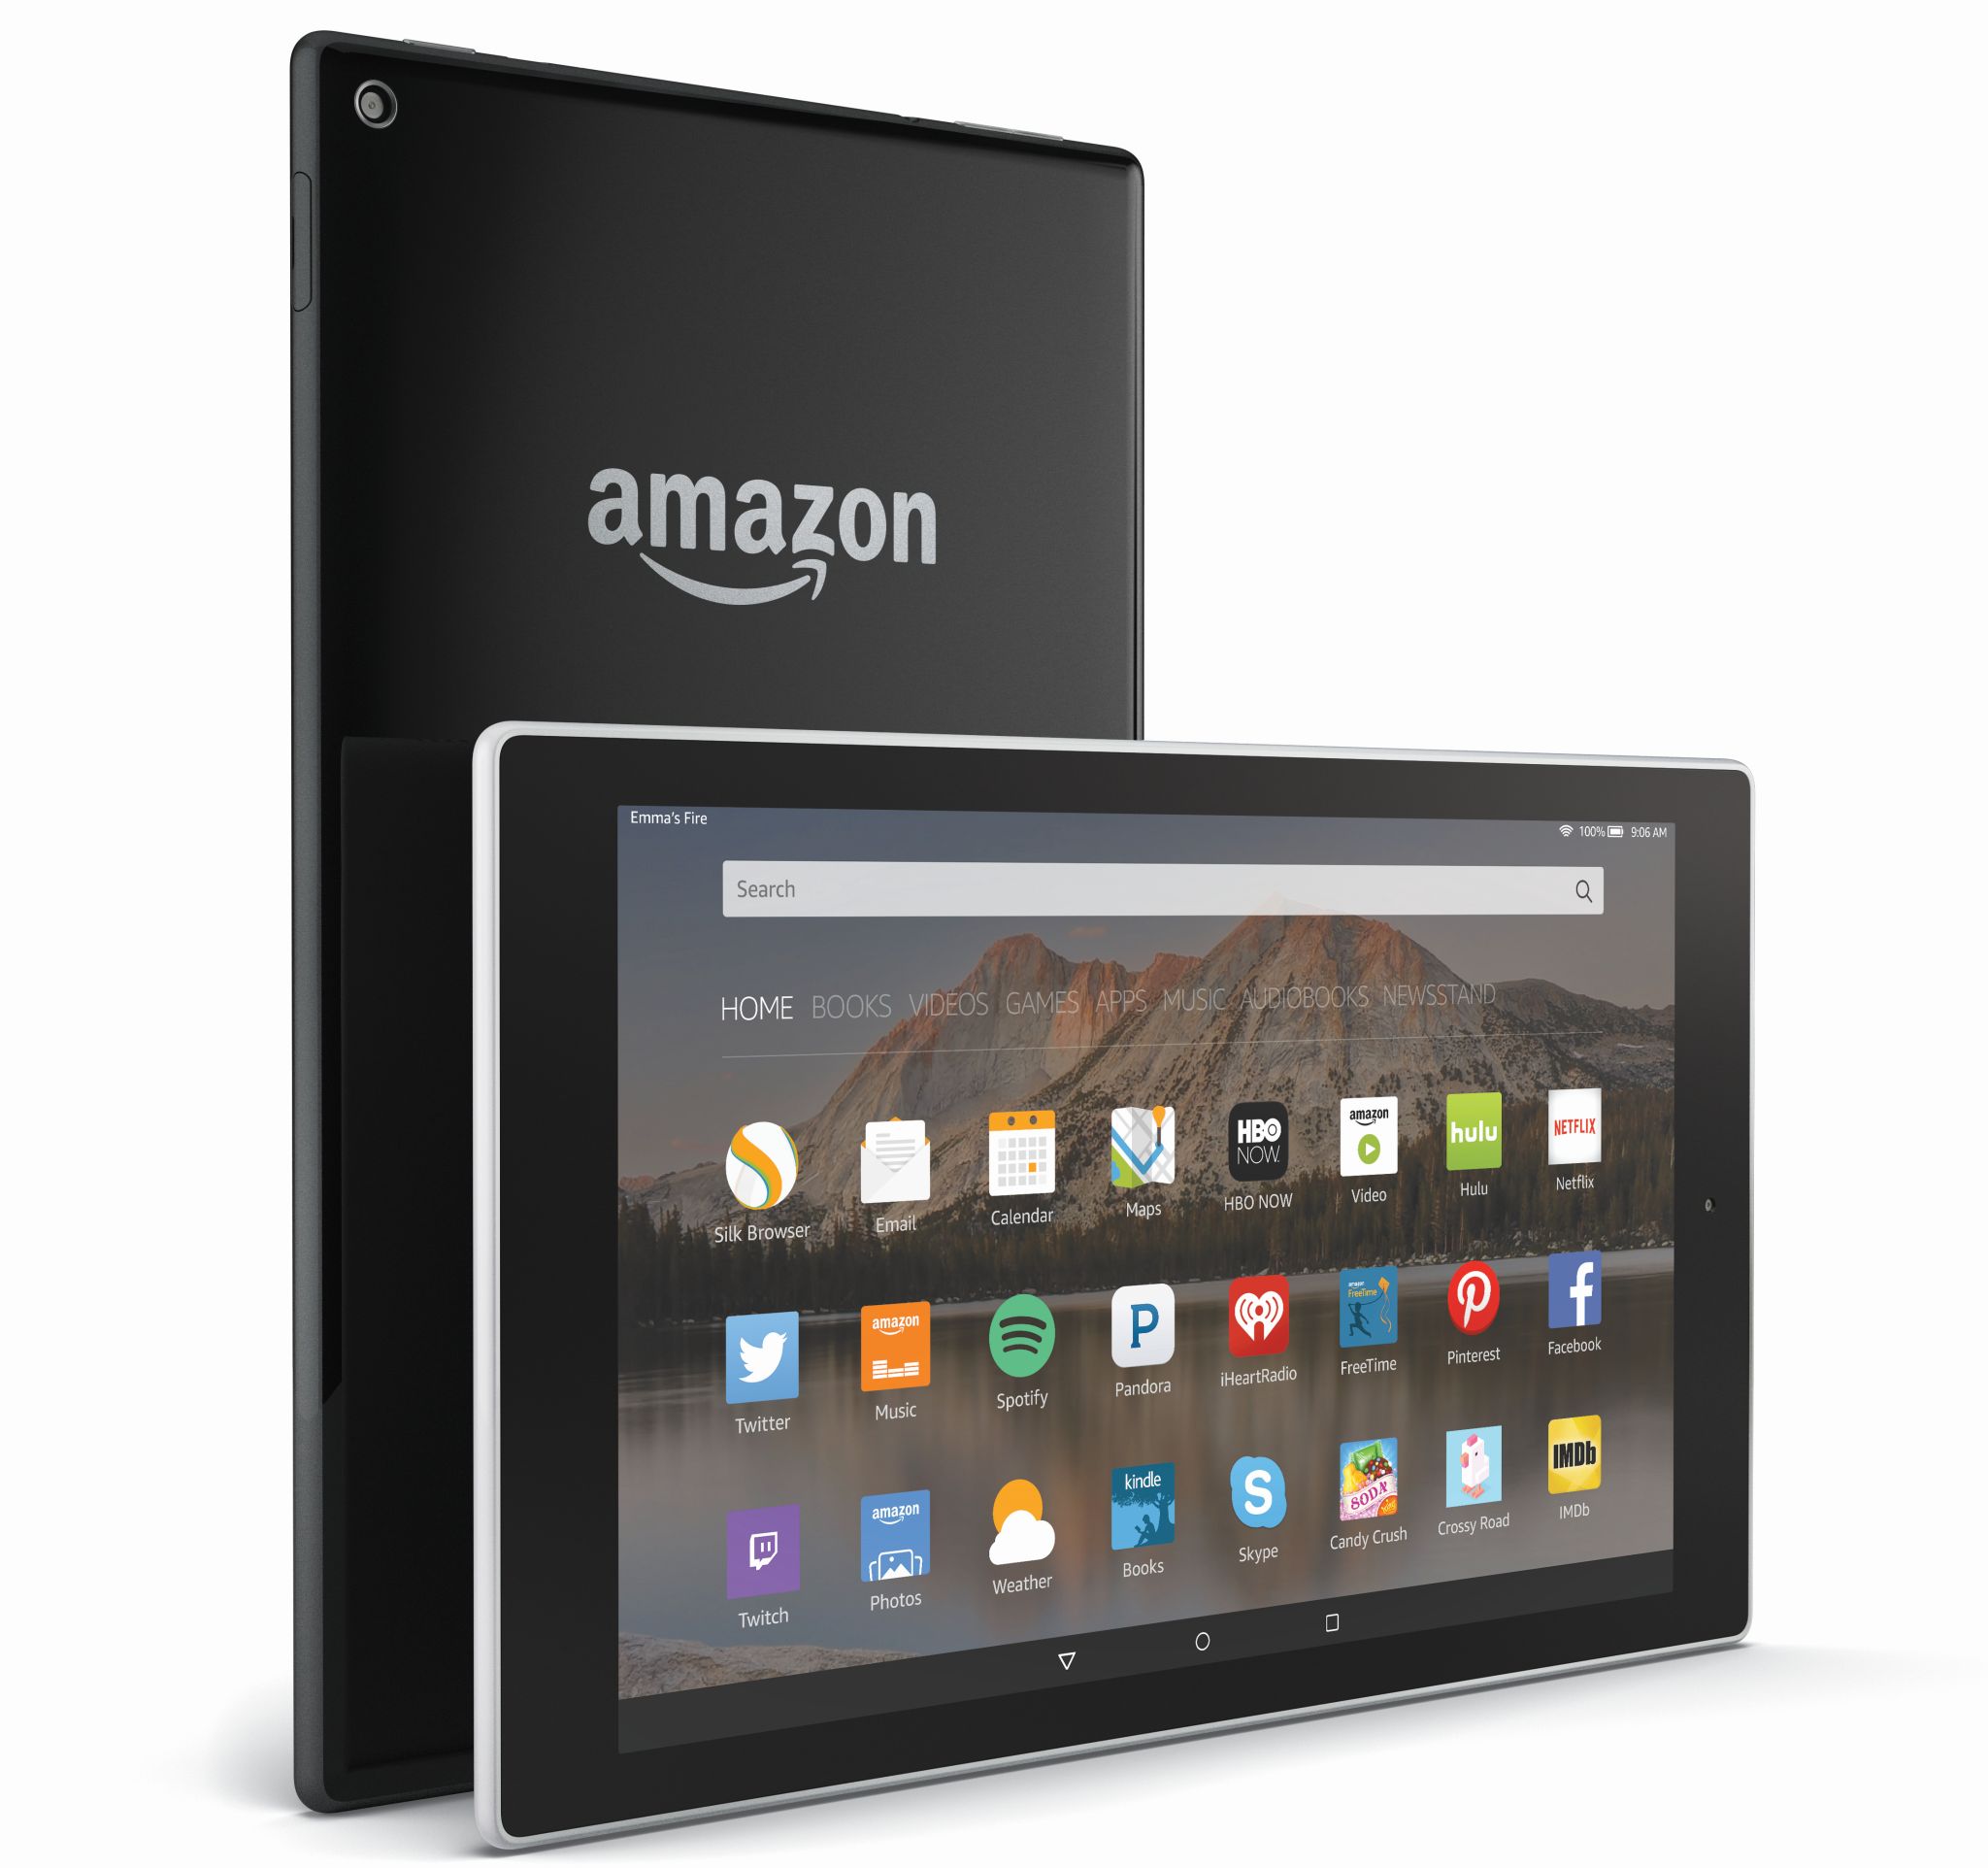 7 Amazon Fire tablet problems and how to fix them